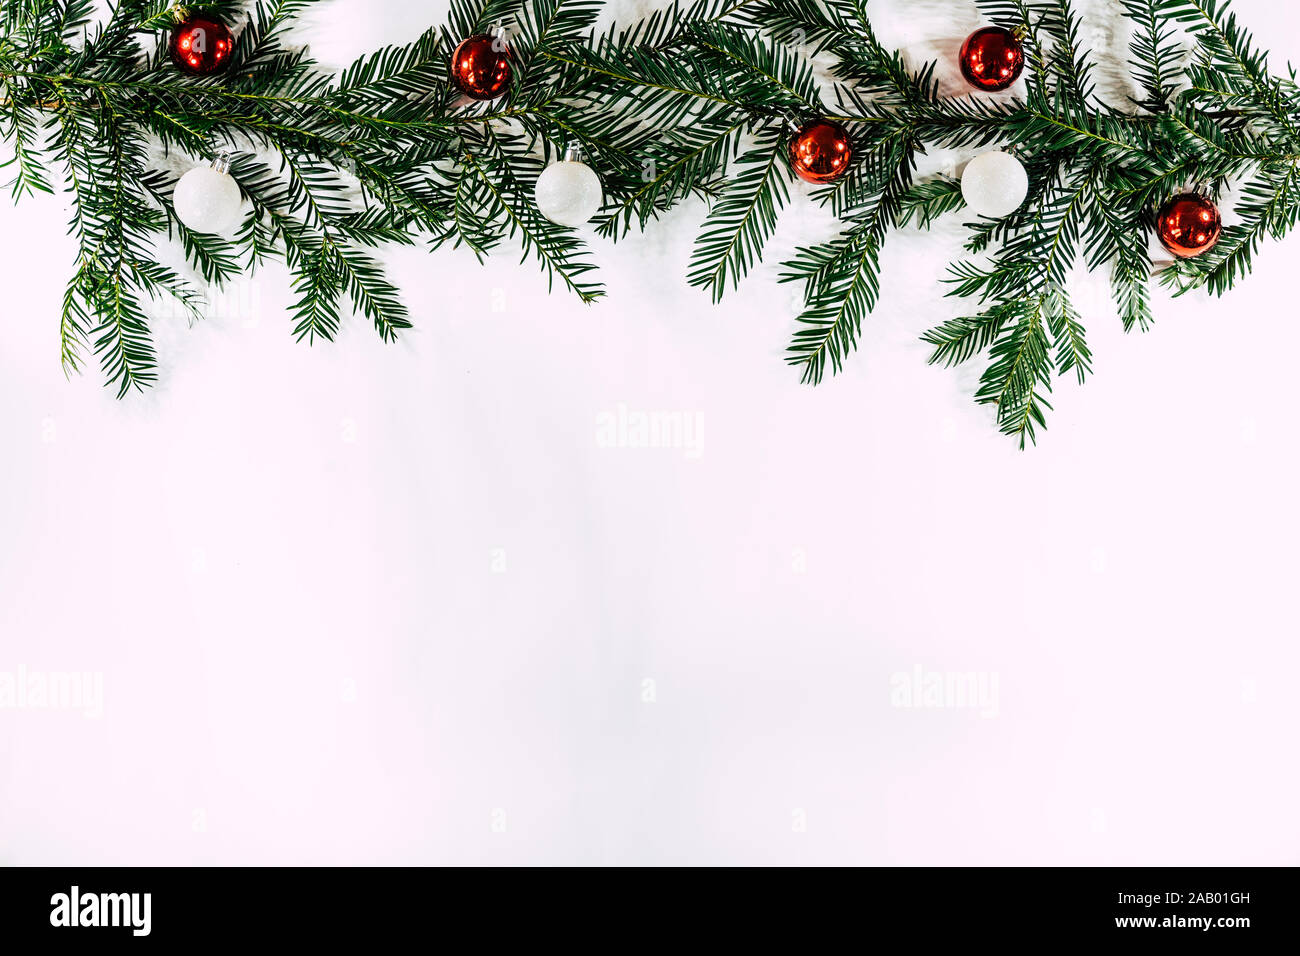 Christmas Border with tree branch's and baubles on a white background Stock Photo